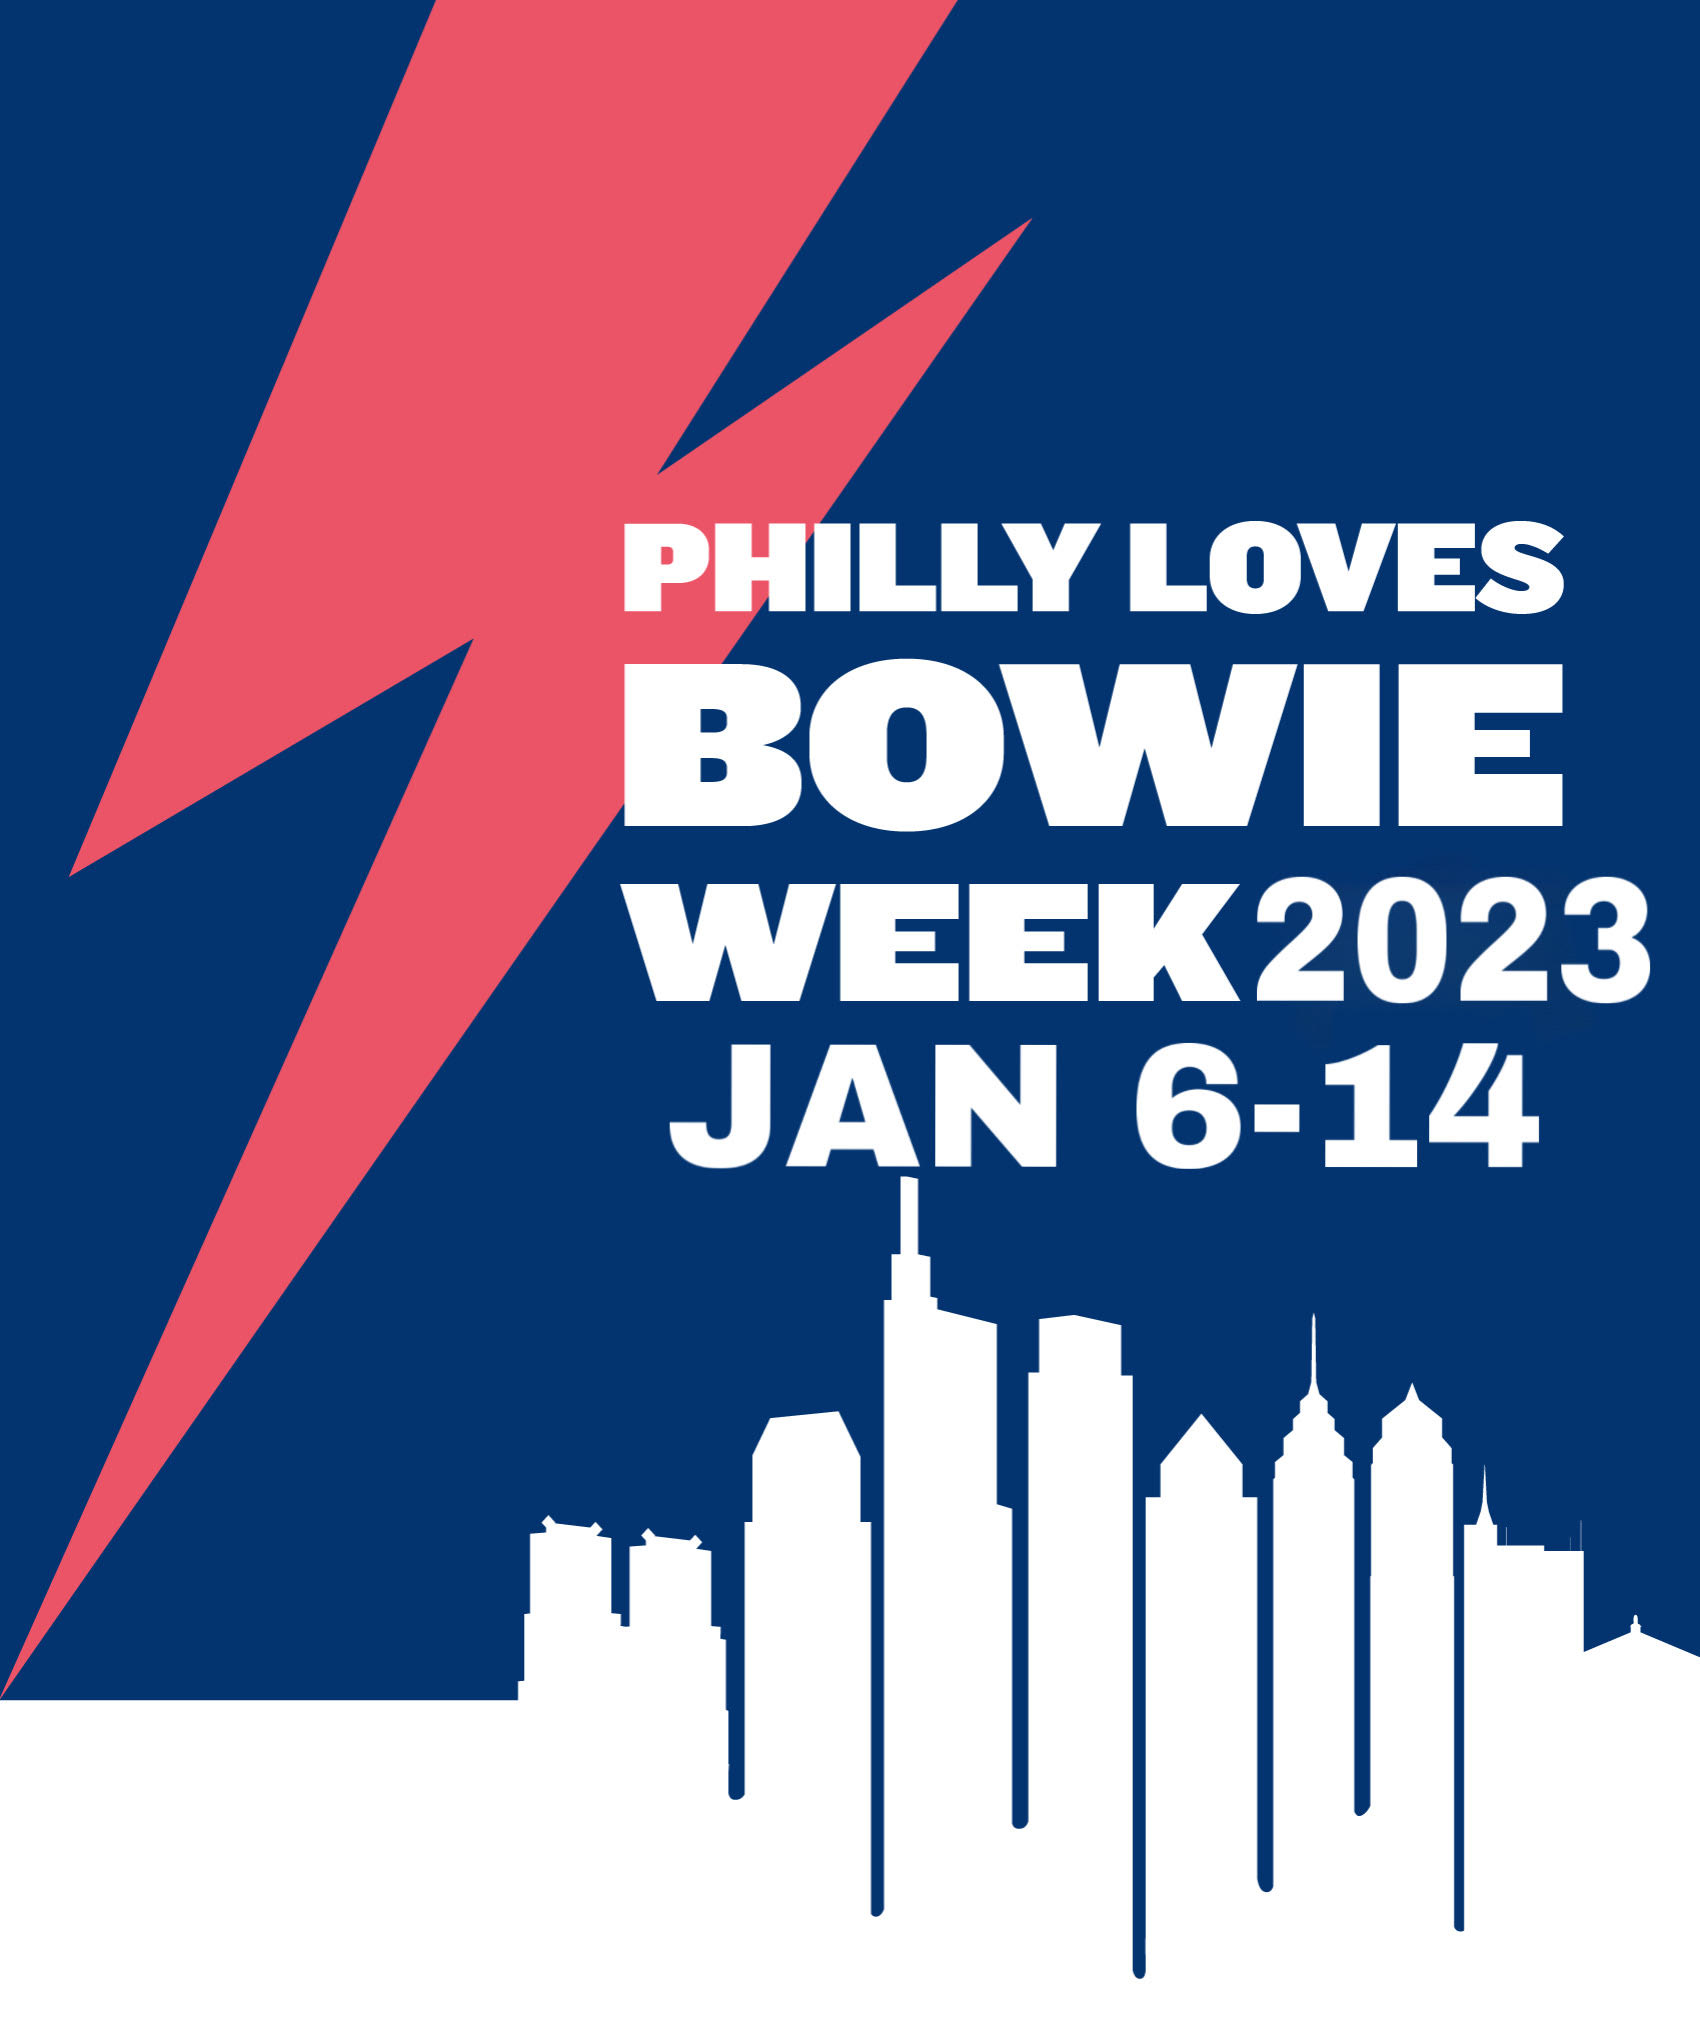 PHILLY LOVEW BOWIE